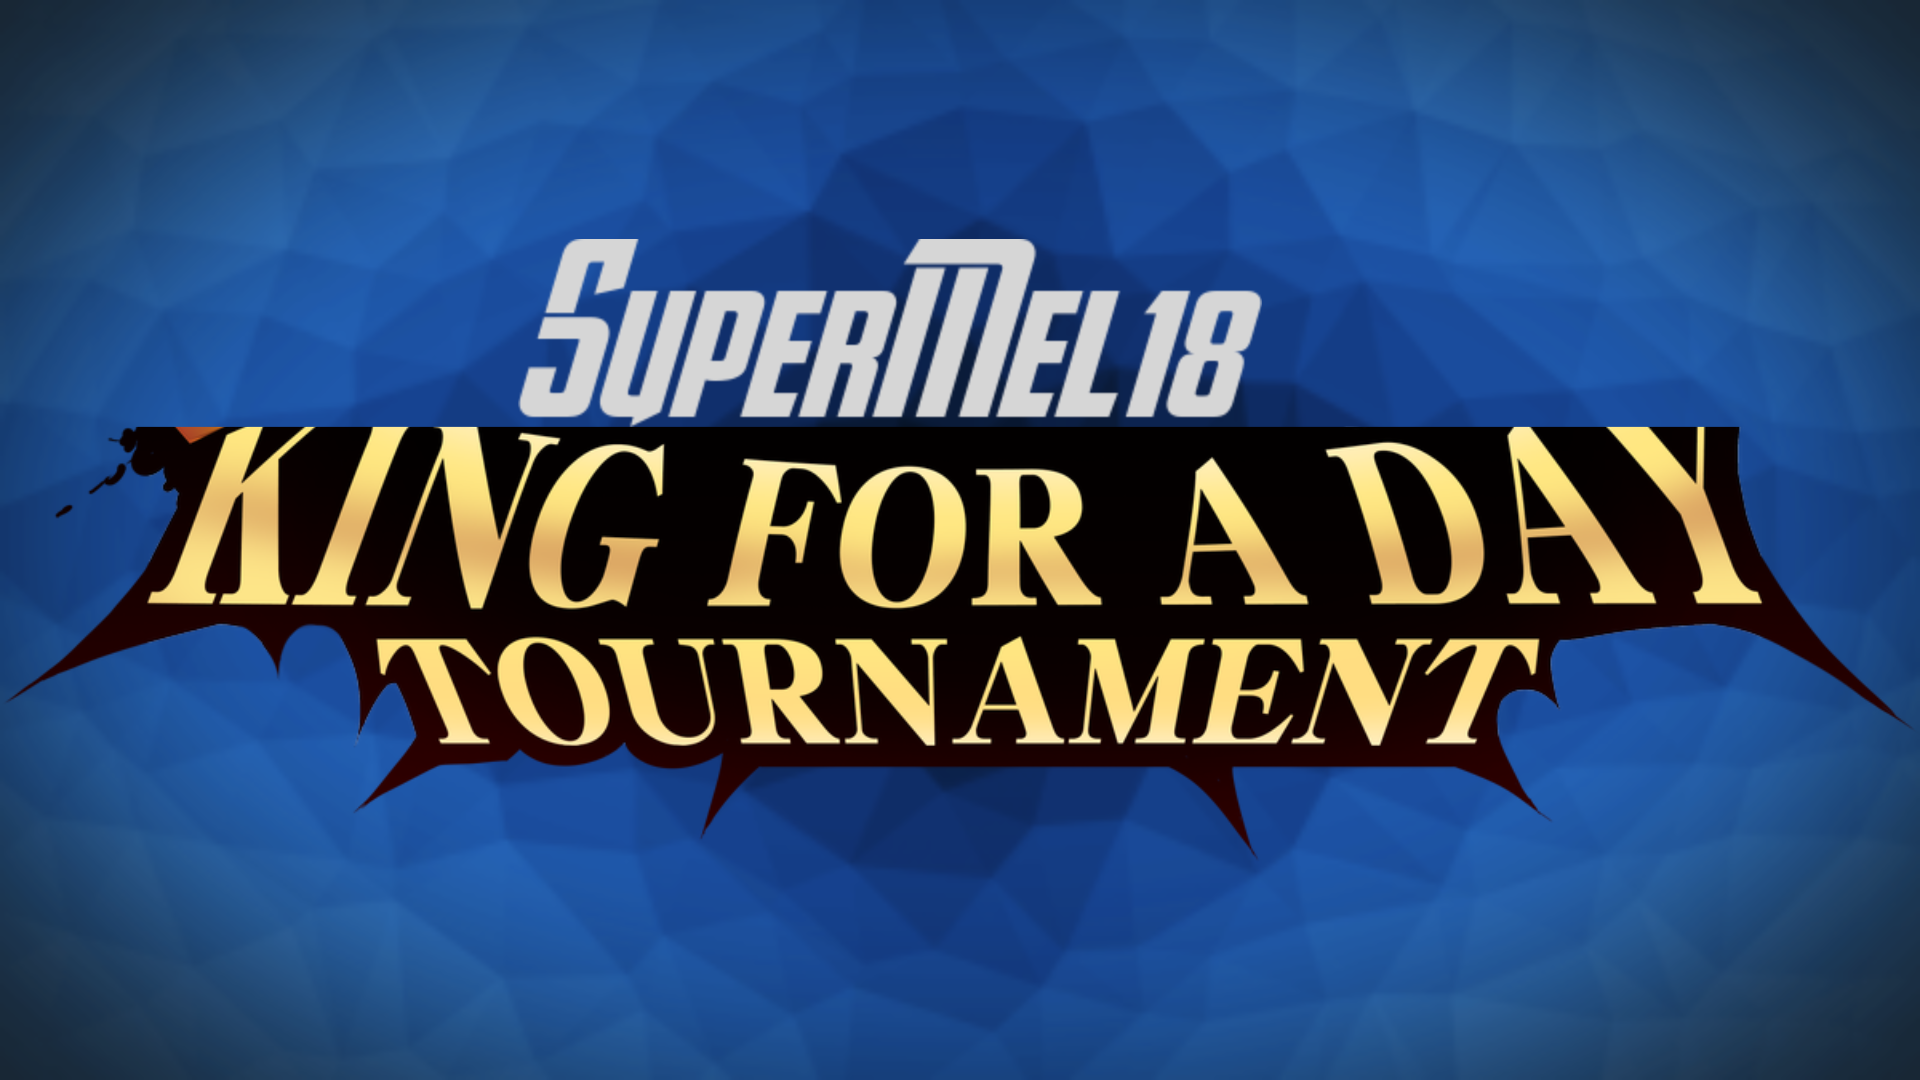 Supermel18 King For A Day Tournament Mojo The Supermel18 King For A Day Mojo - 10 best roblox games to play in 2019 games mojo blog